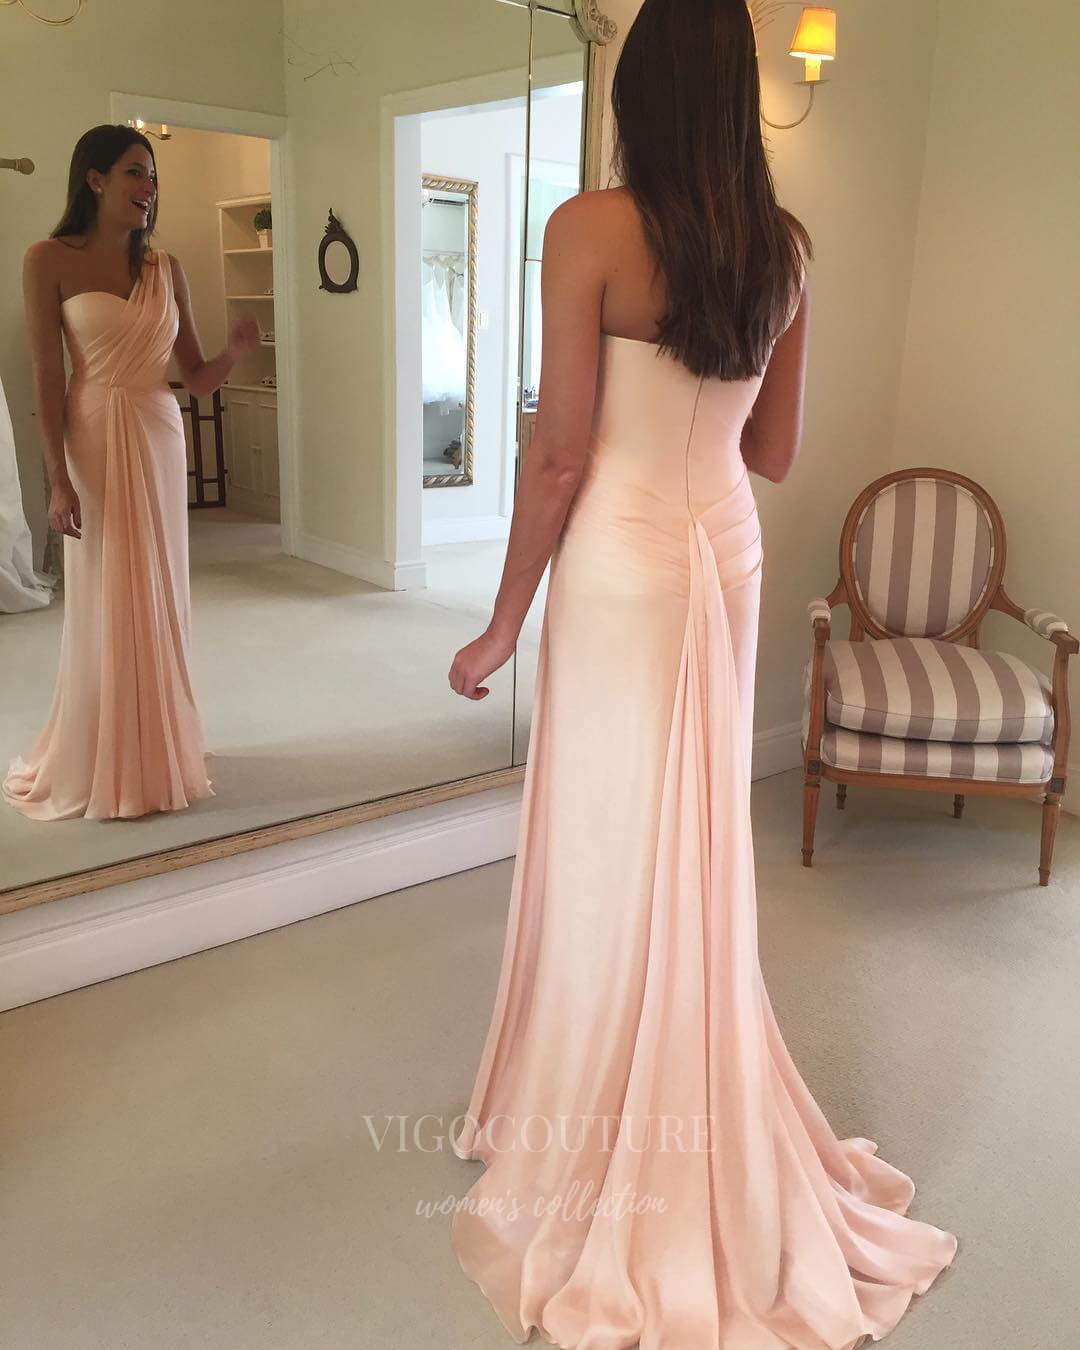 vigocouture-Blush Pleated Stretchy Jersey One Shoulder Prom Dress 21000-Prom Dresses-vigocouture-